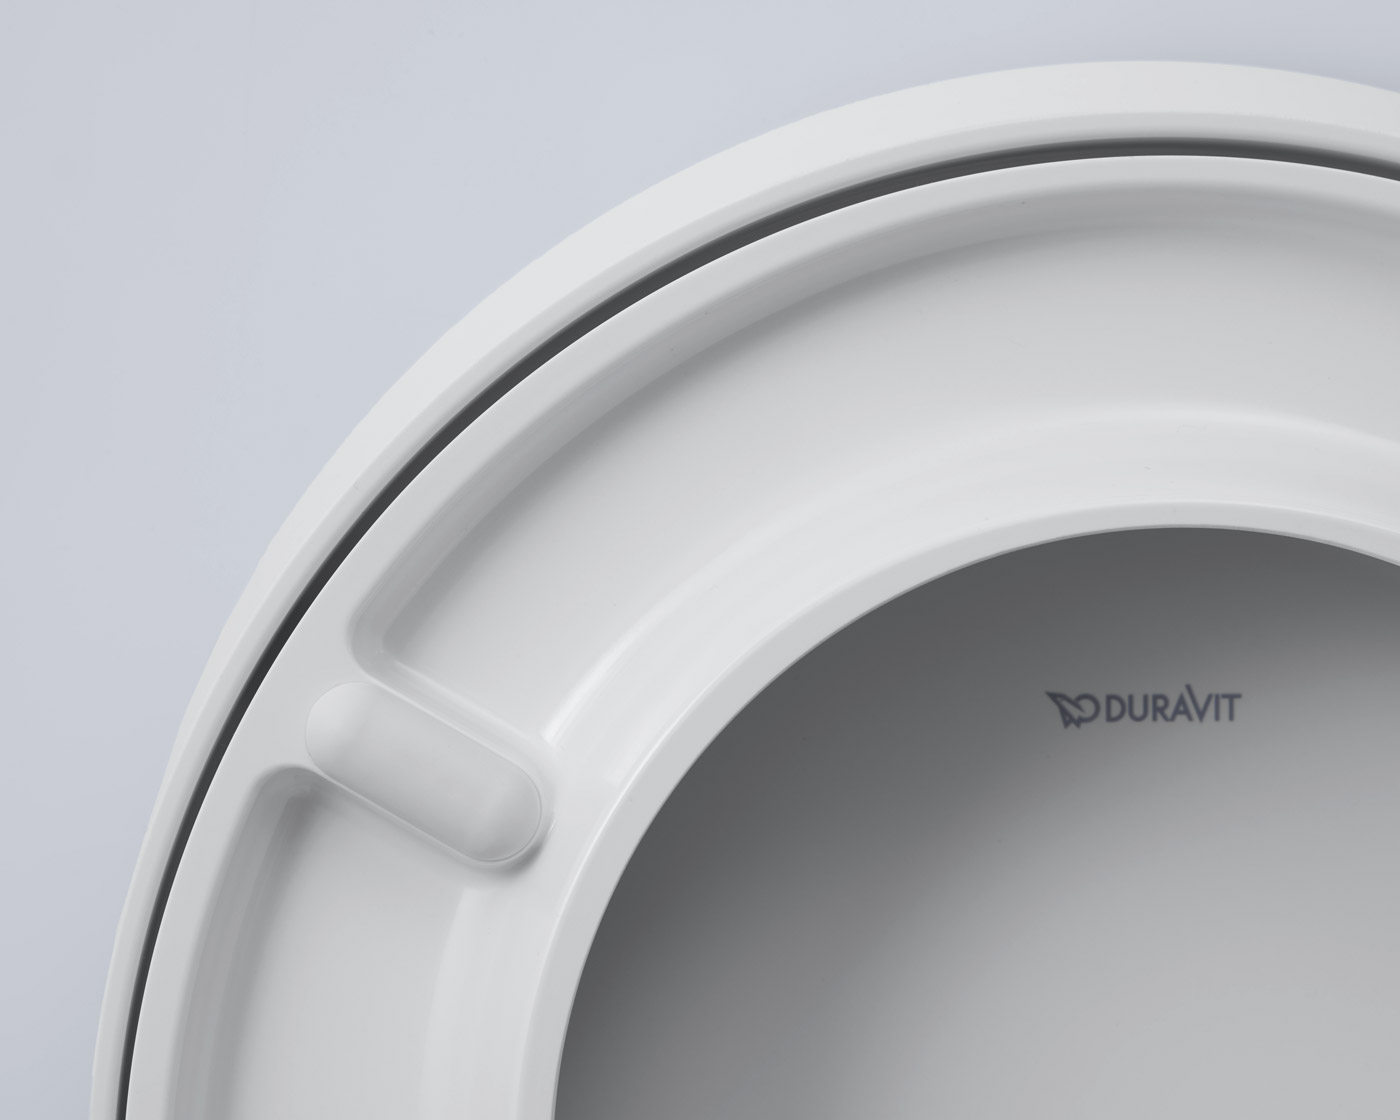 Oval toilet seat with soft close mechanism
